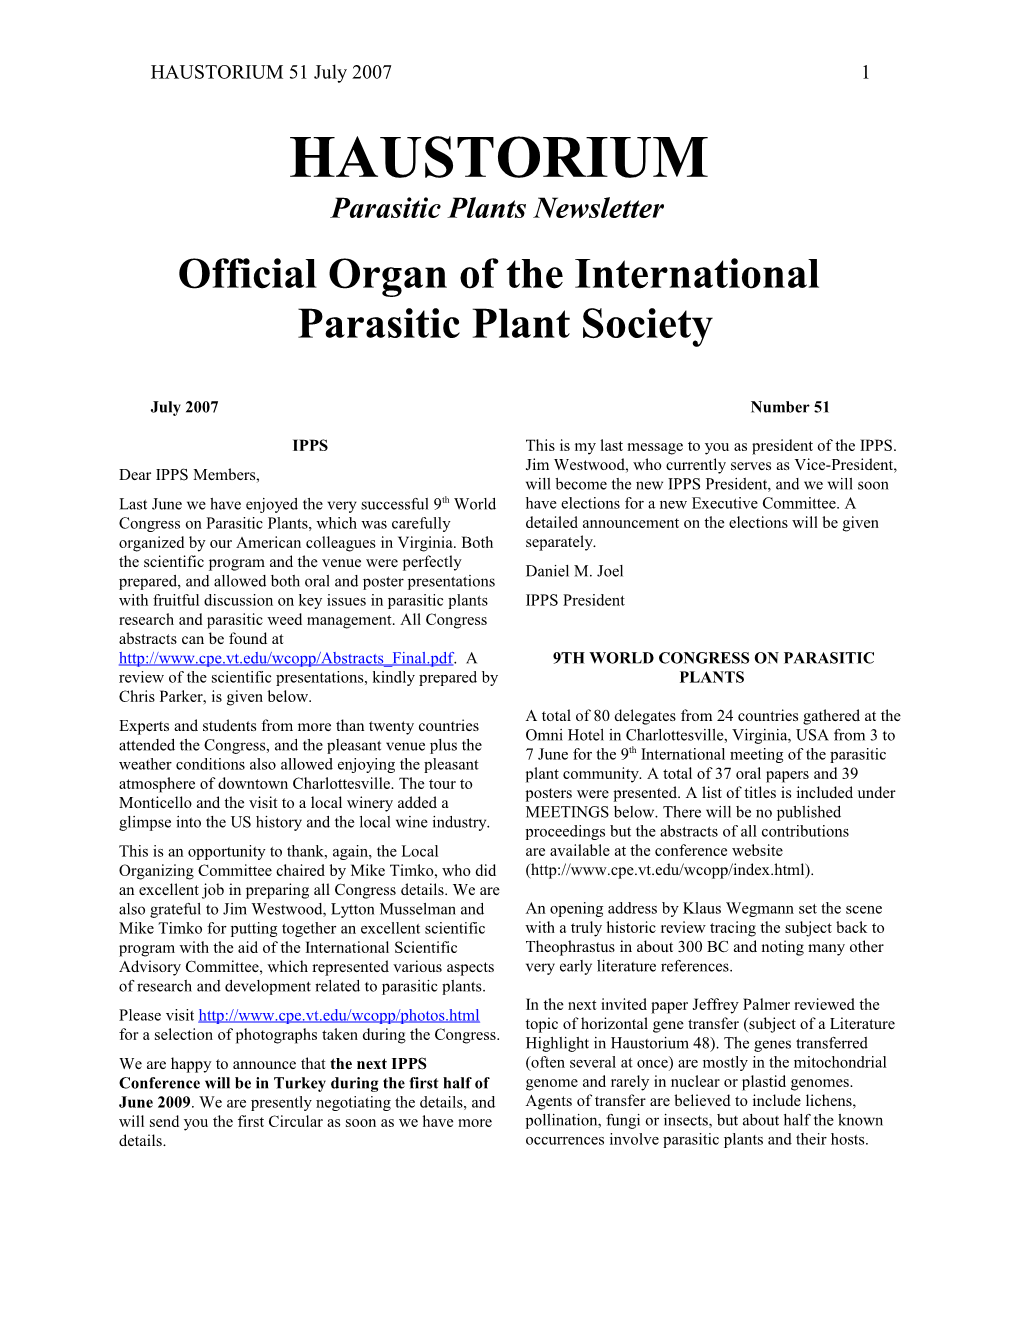 Official Organ of the International Parasitic Plant Society